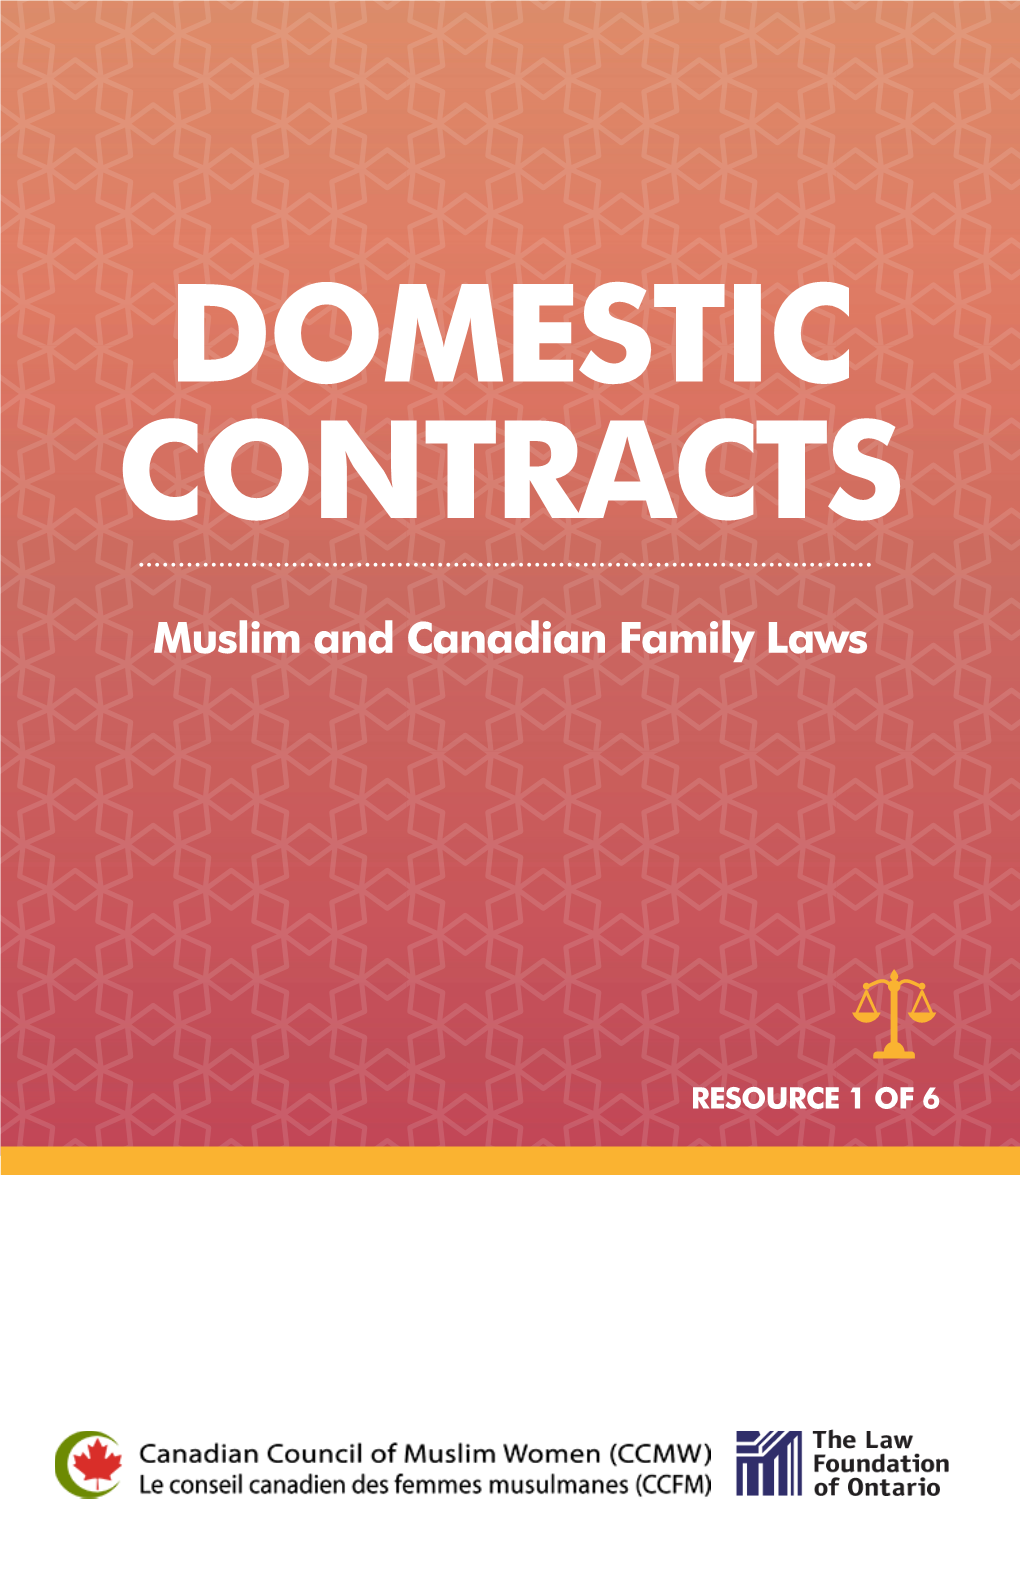 Domestic Contracts